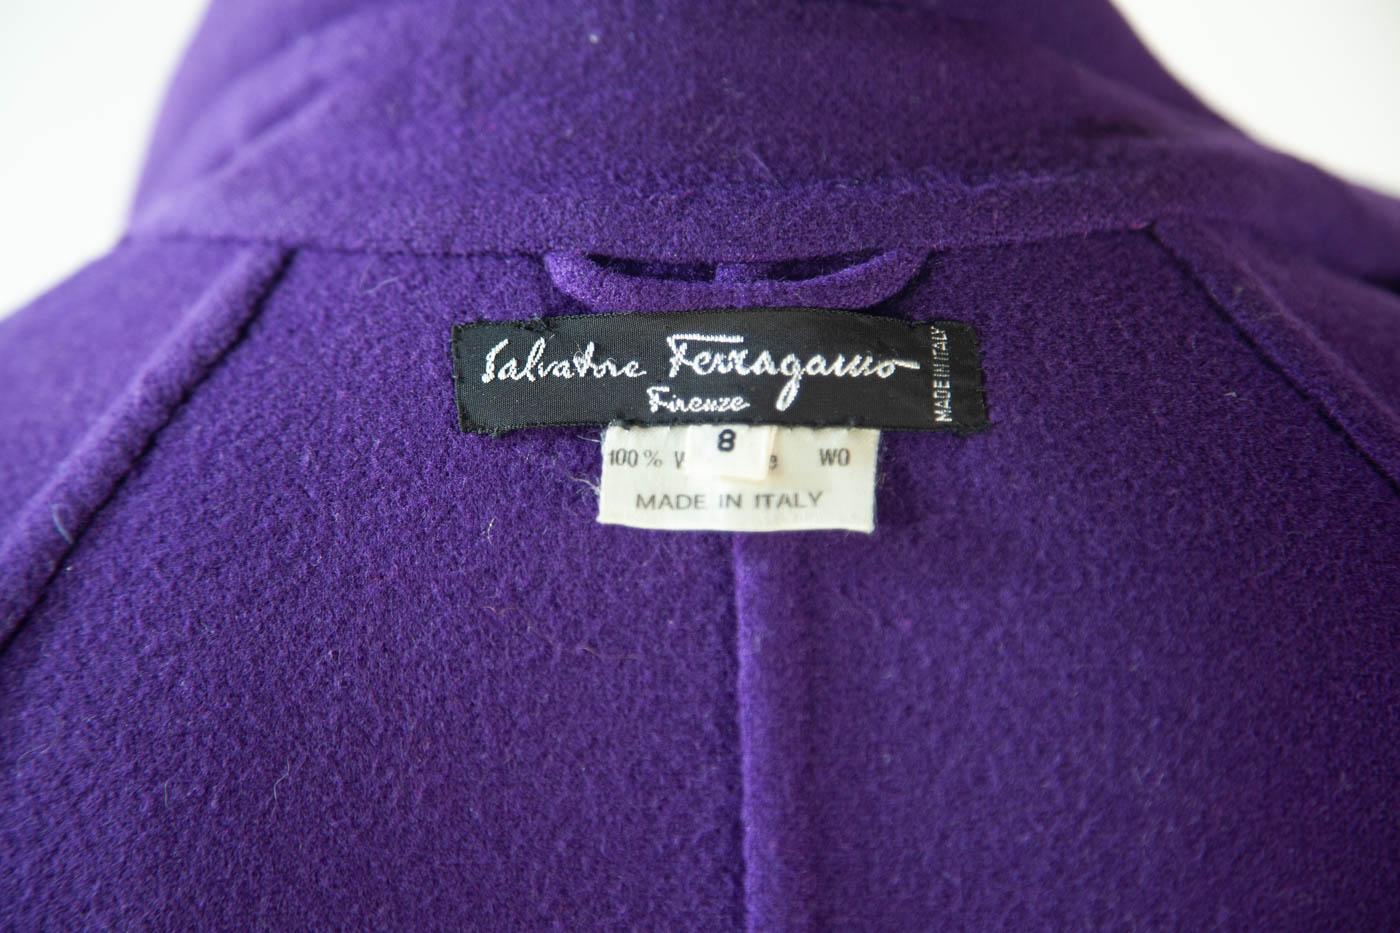 Salvatore Ferragamo, 20th Century, Eggplant, Wool Trench Coat

Light weight, stunning deep purple color trench coat in excellent condition. 

Sz8